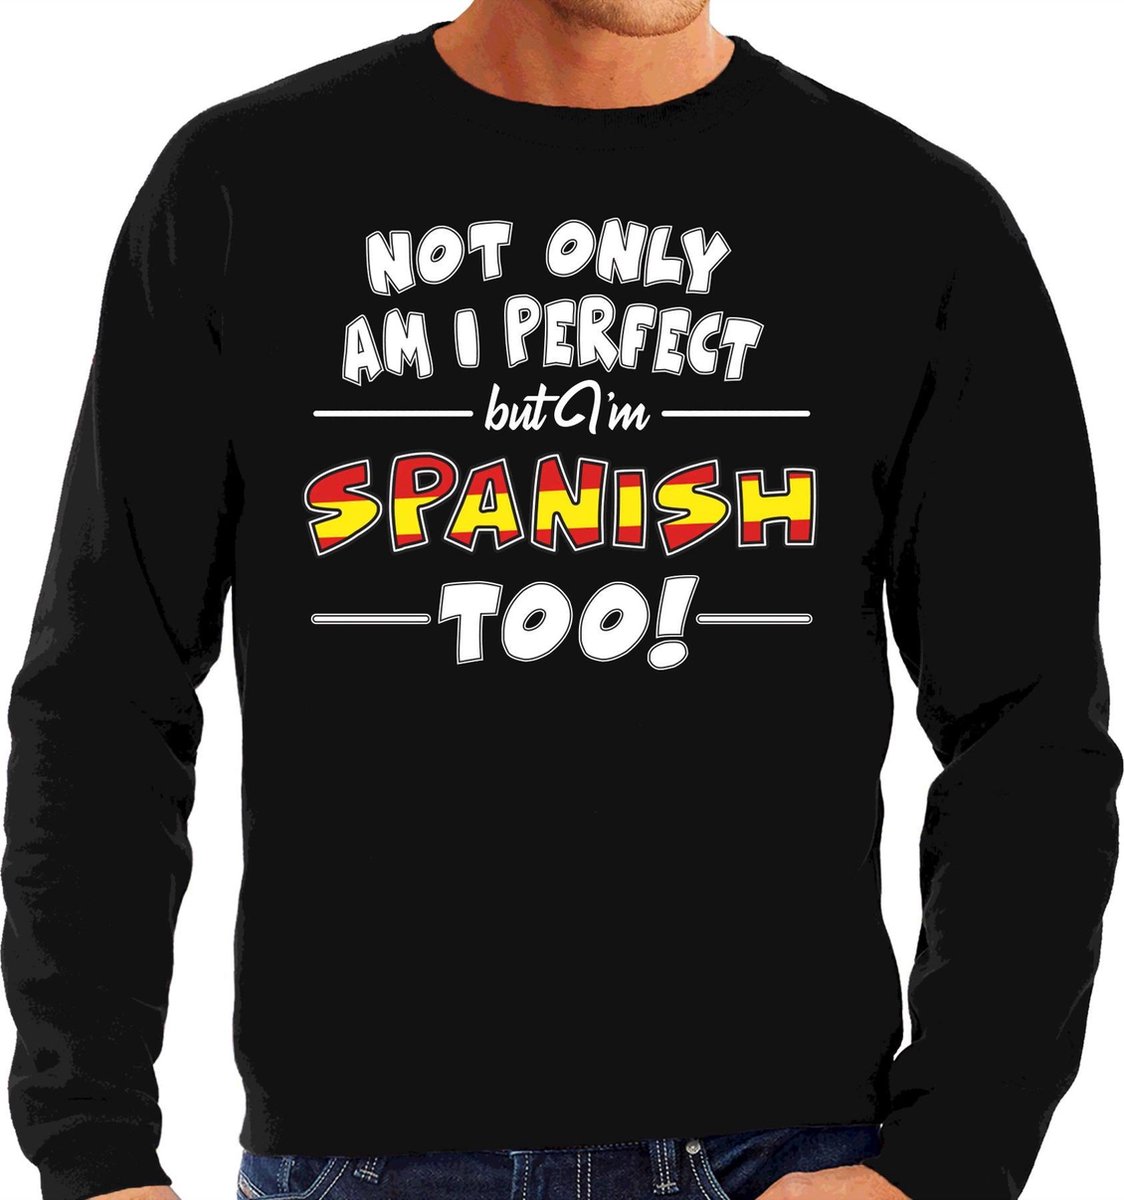 Not only am I perfect but im Spanish / Spaans too sweater - heren - zwart - Spanje cadeau trui M